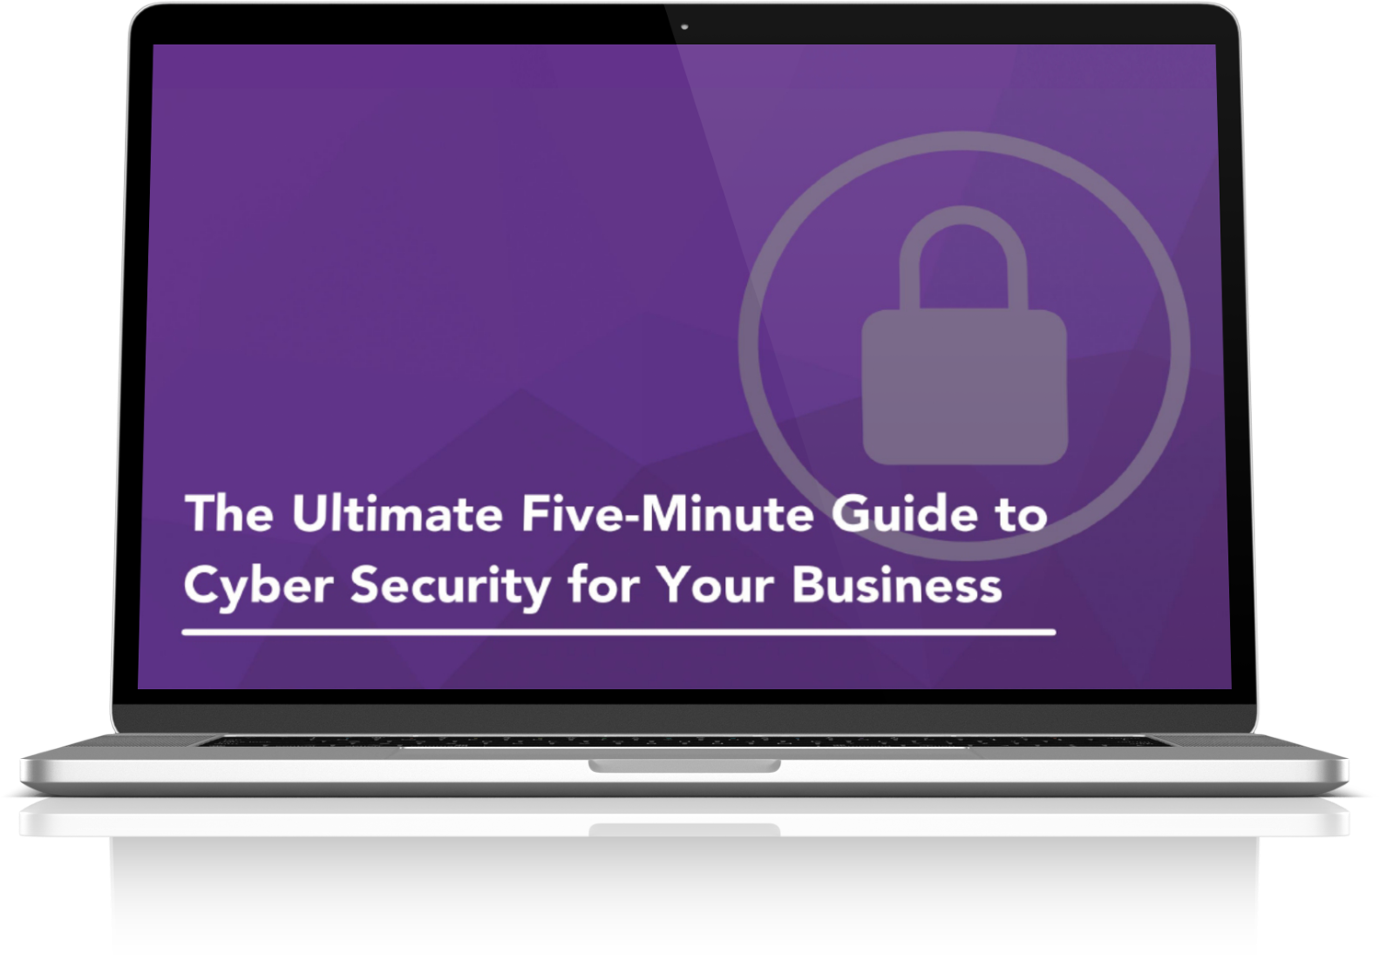 Cyber security guide for business laptop image resized